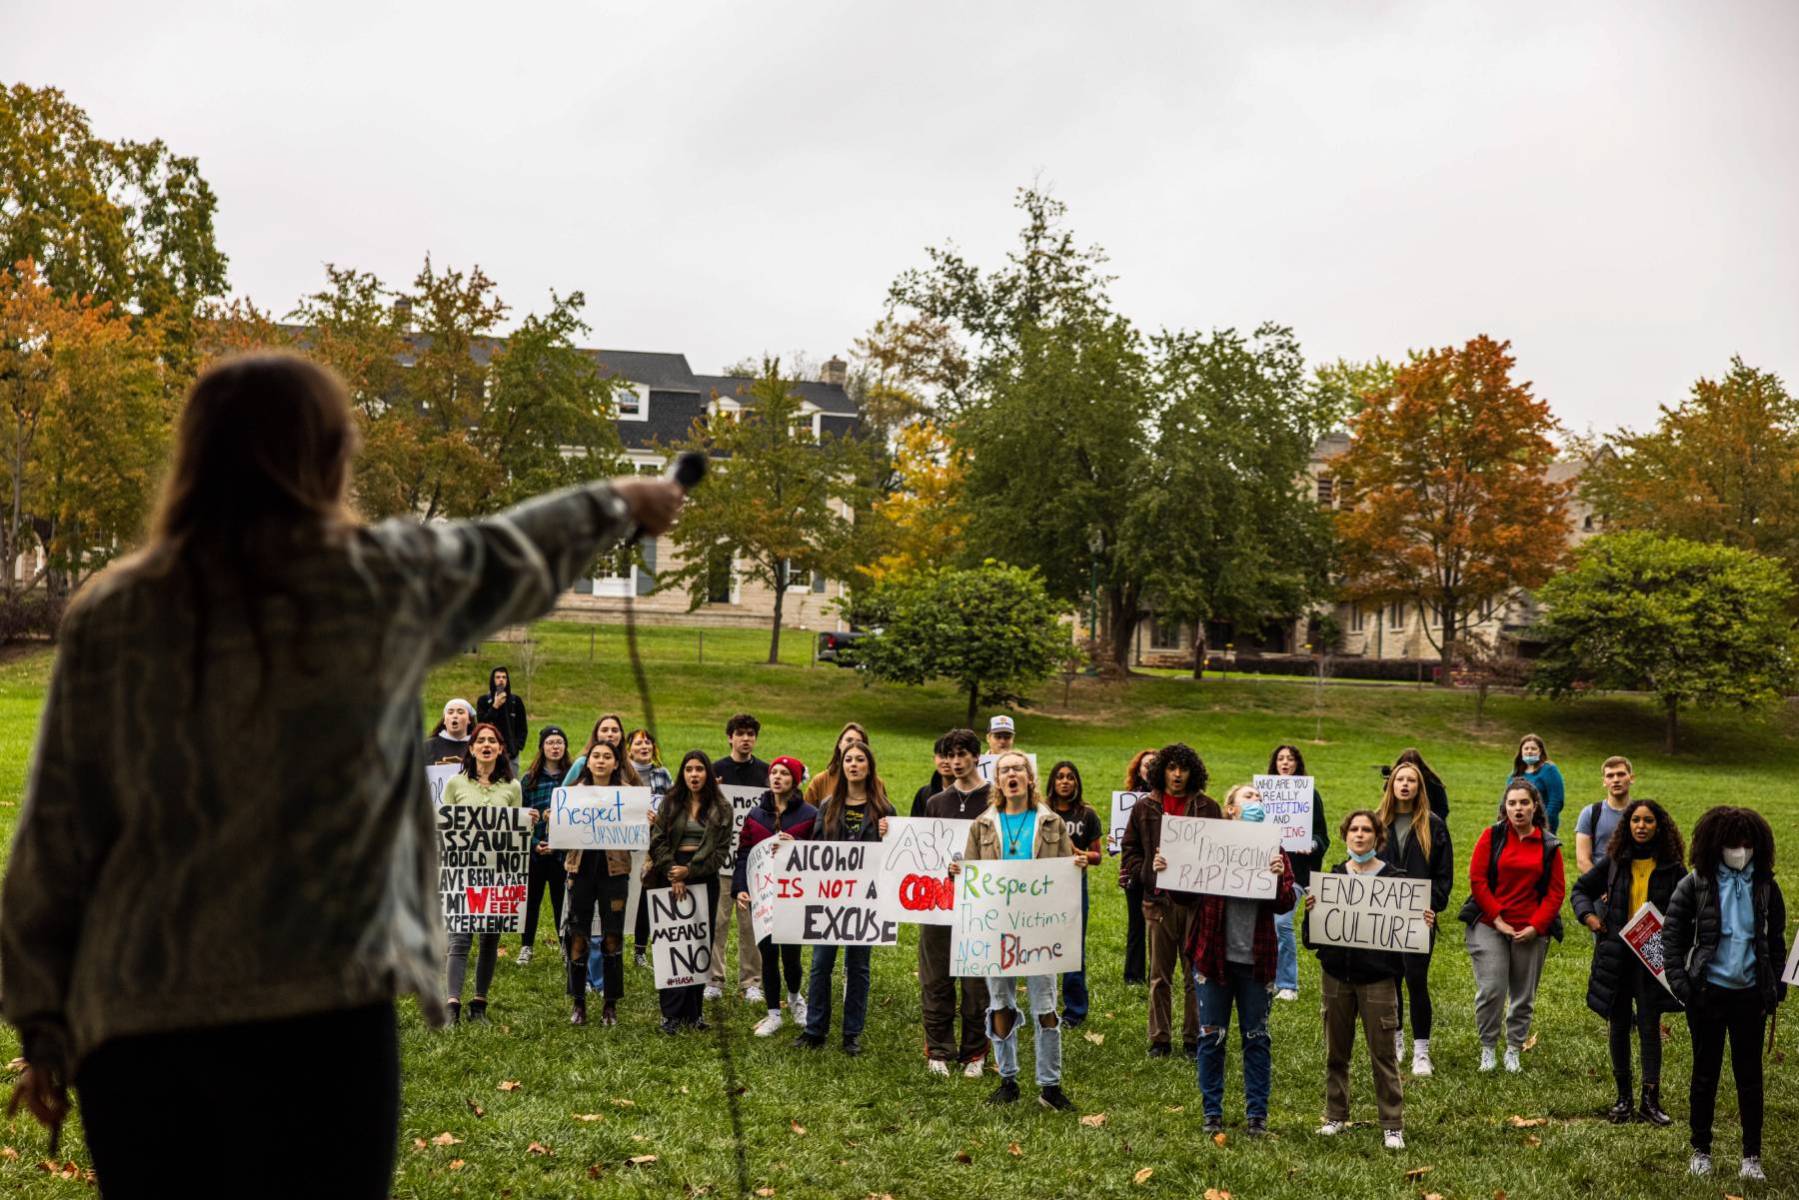 Protesters chant in support of sexual assault survivors at Indiana University